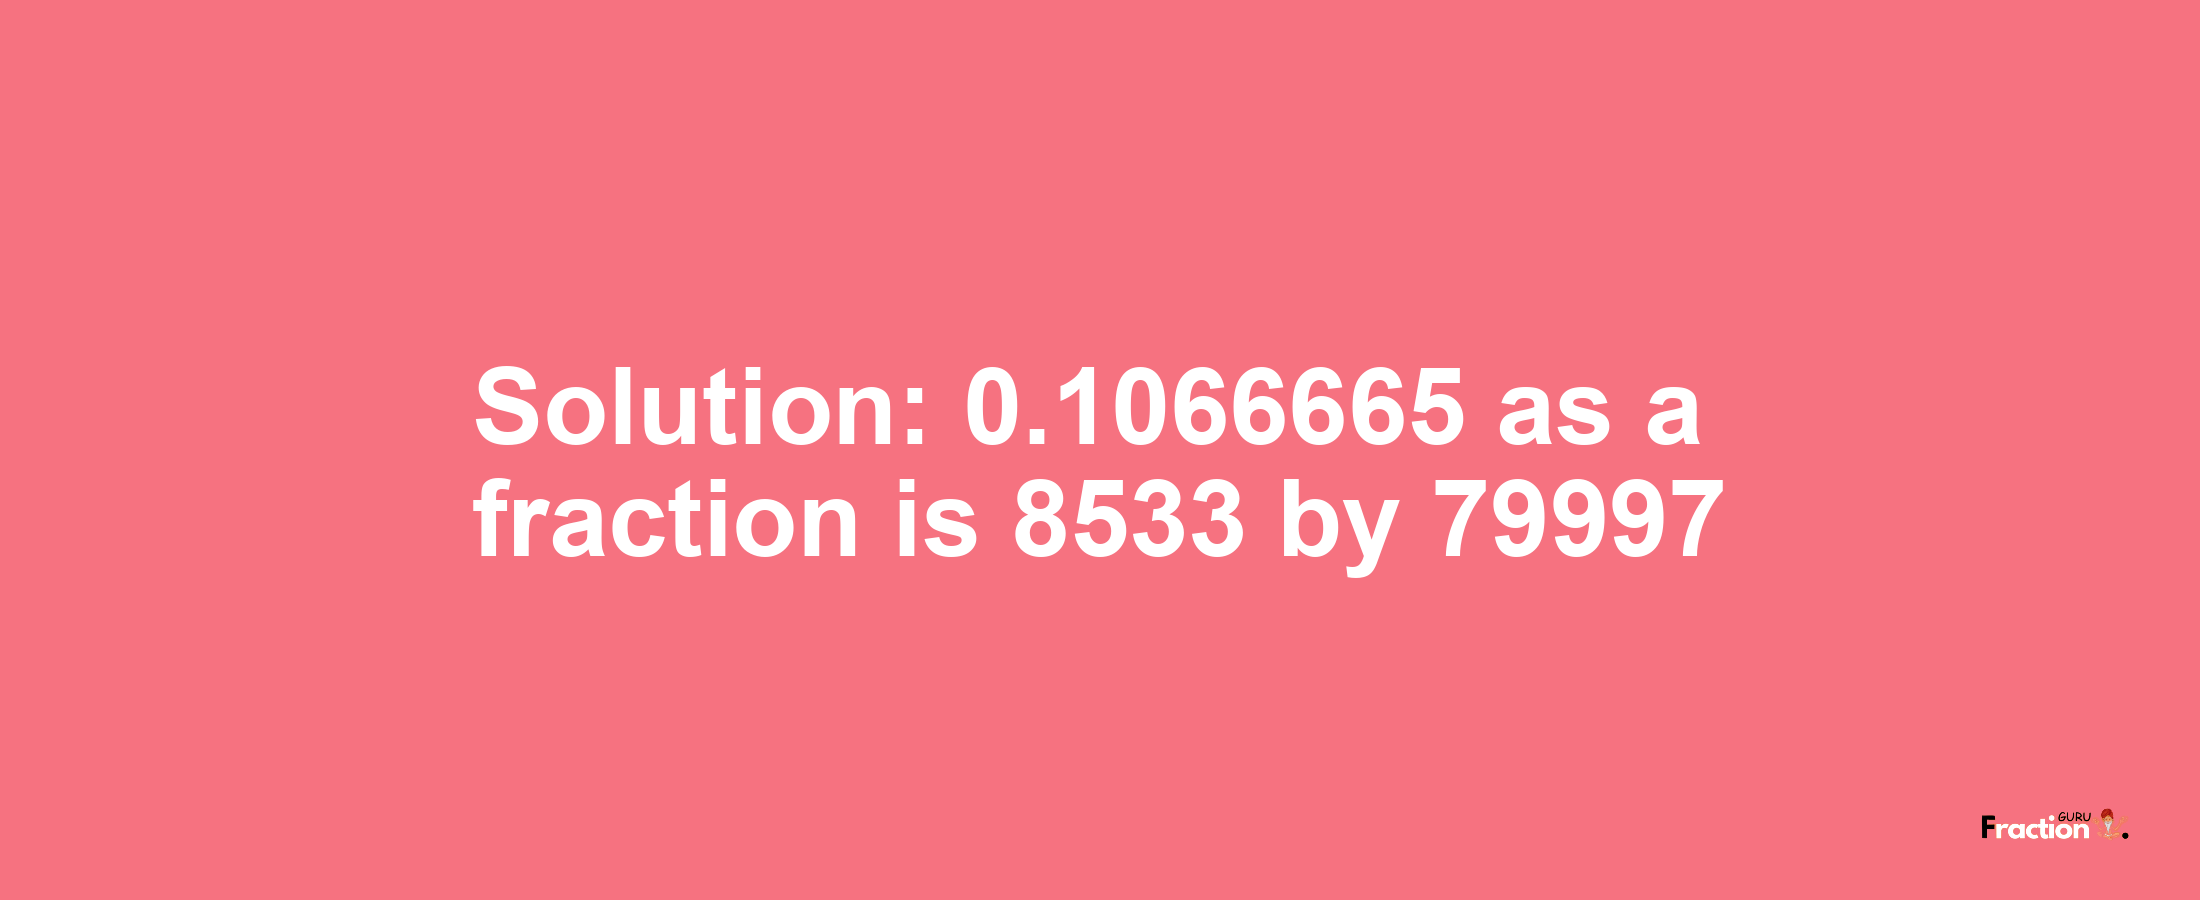 Solution:0.1066665 as a fraction is 8533/79997